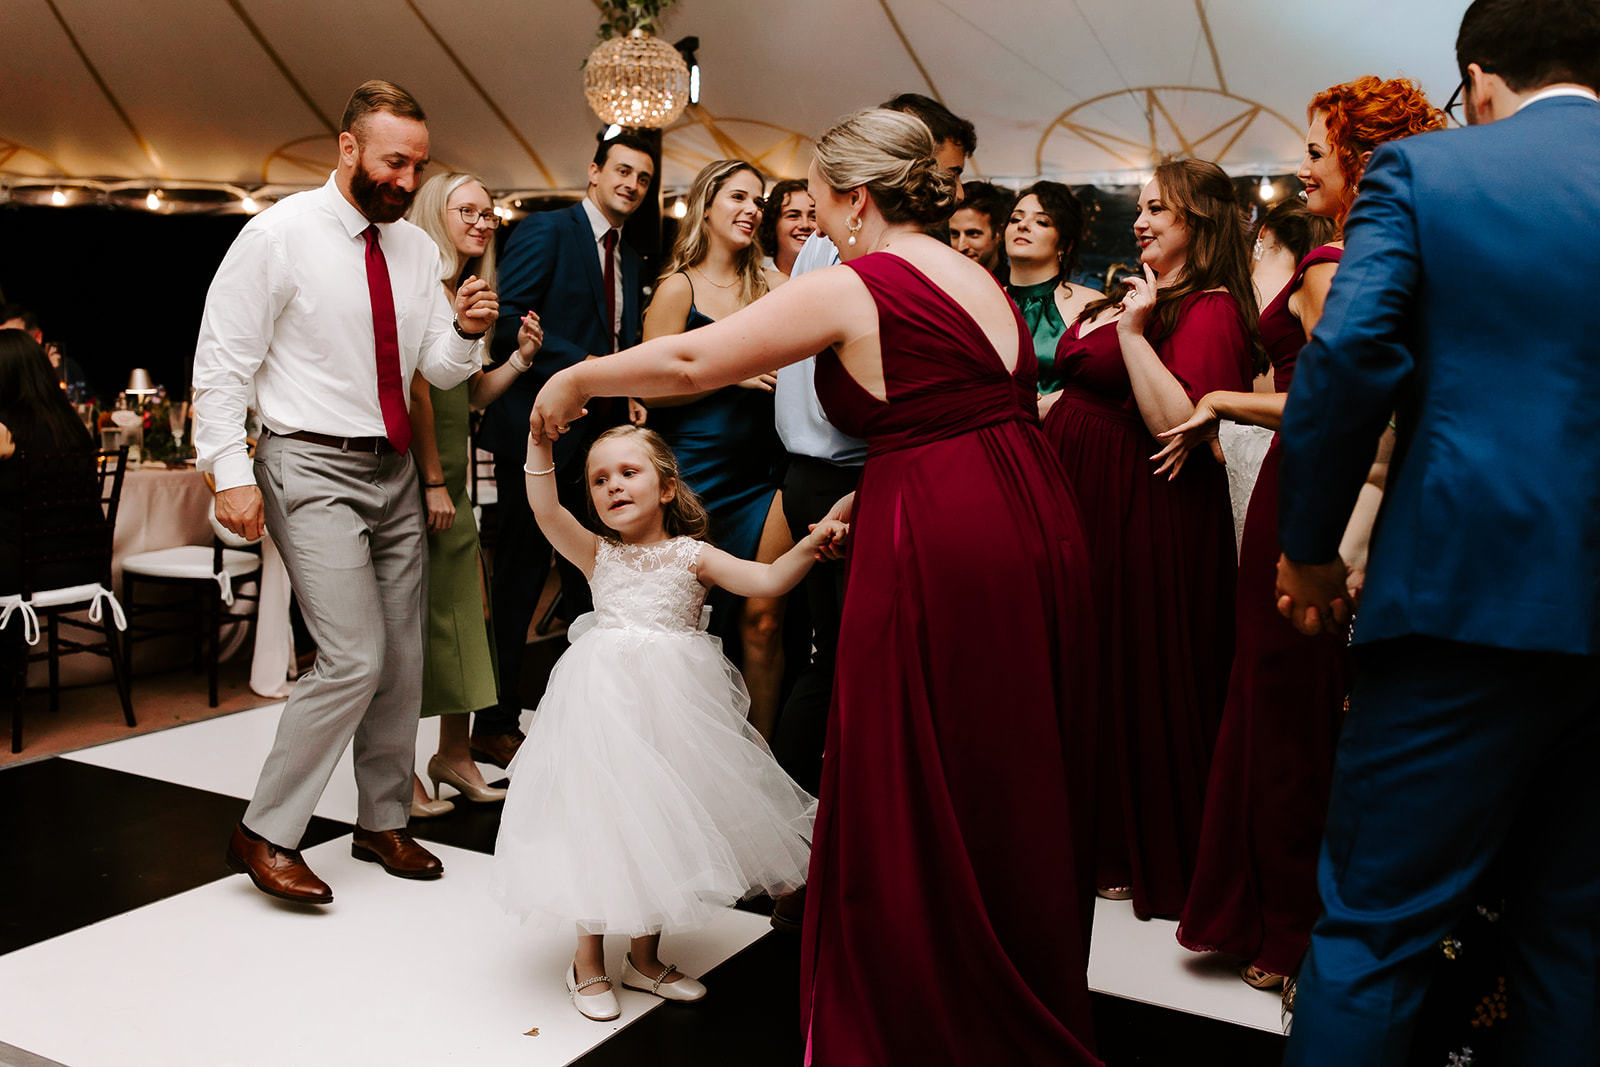 Guests enjoy dancing together during the stunning willowdale estate wedding reception z